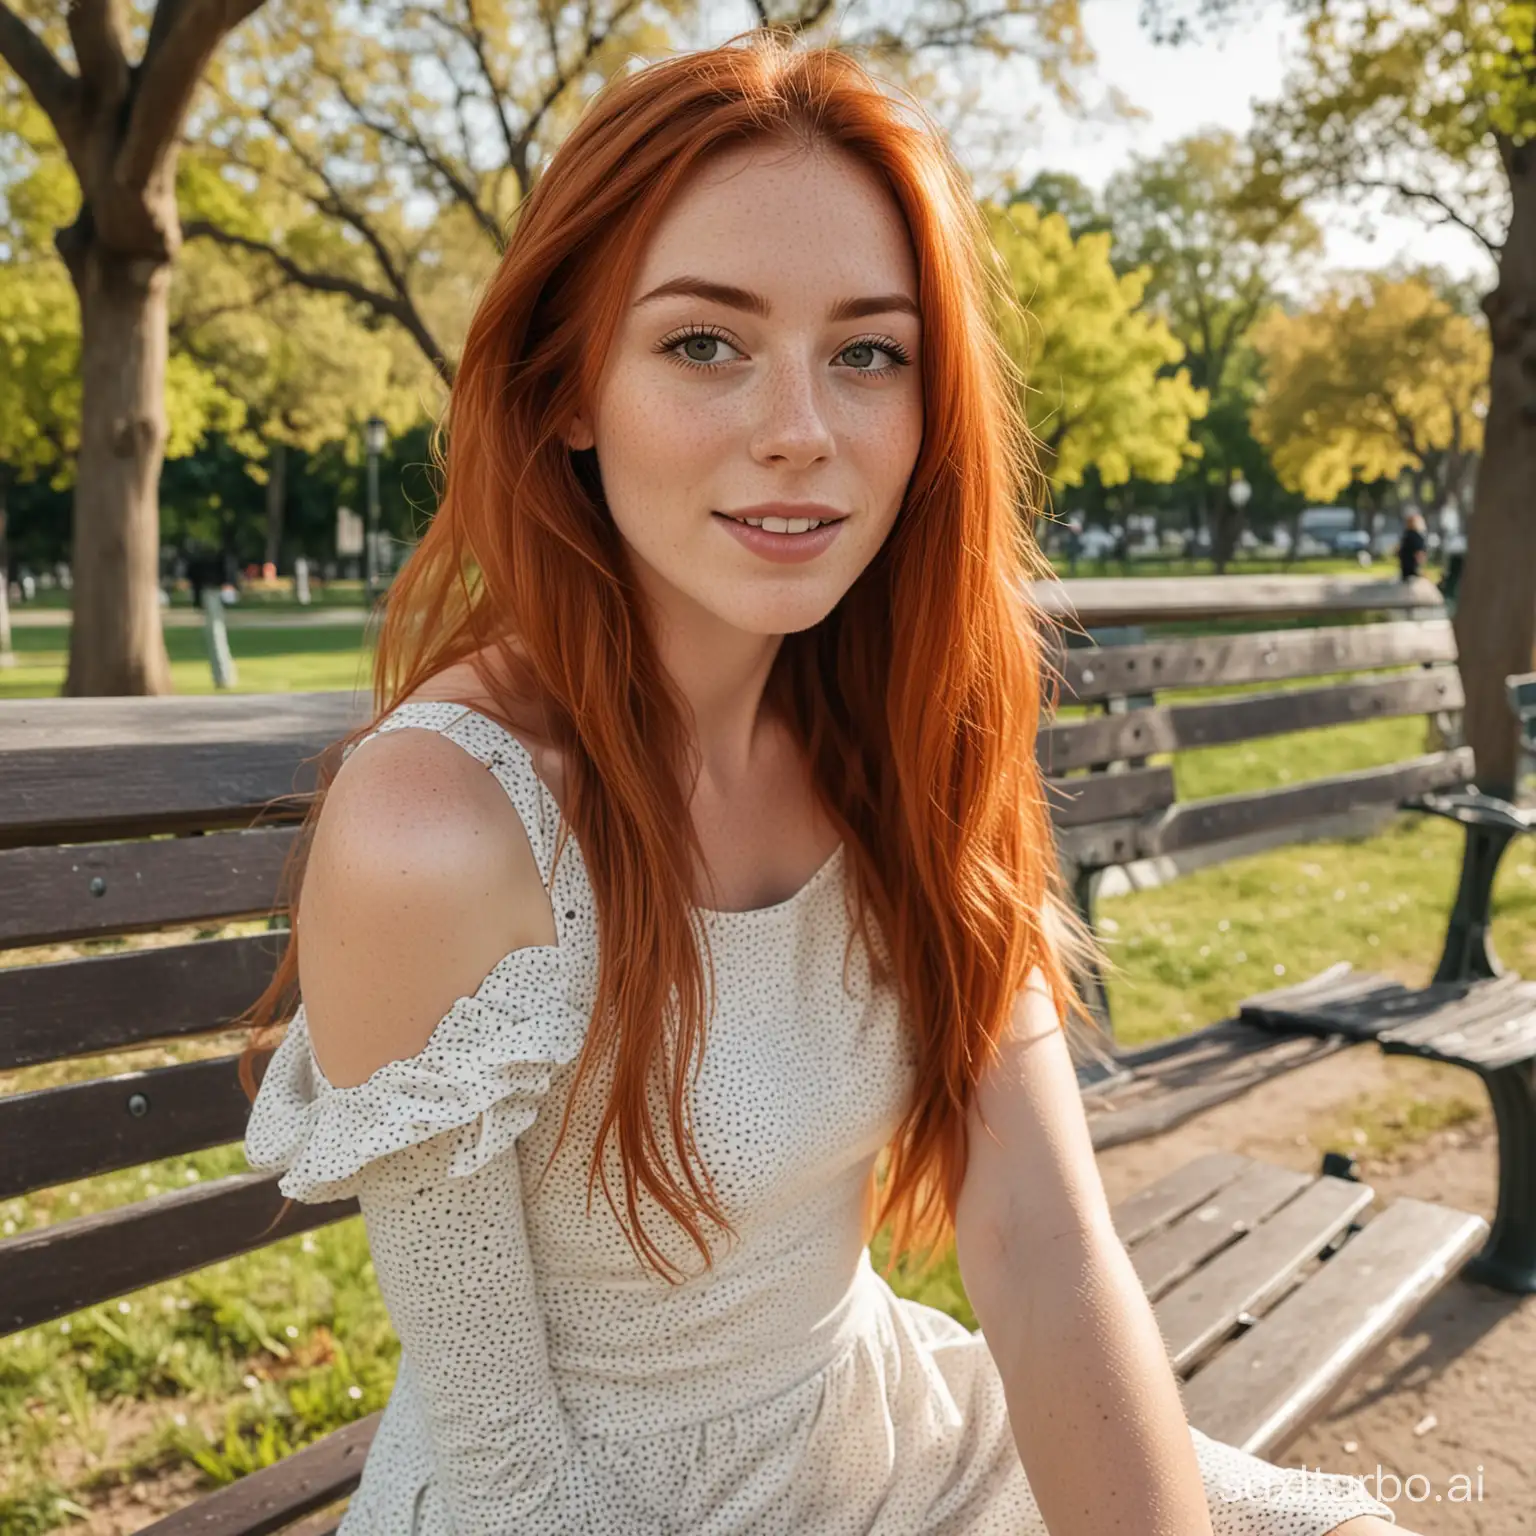 RedHaired-Girl-with-Freckles-Taking-Selfie-in-Park